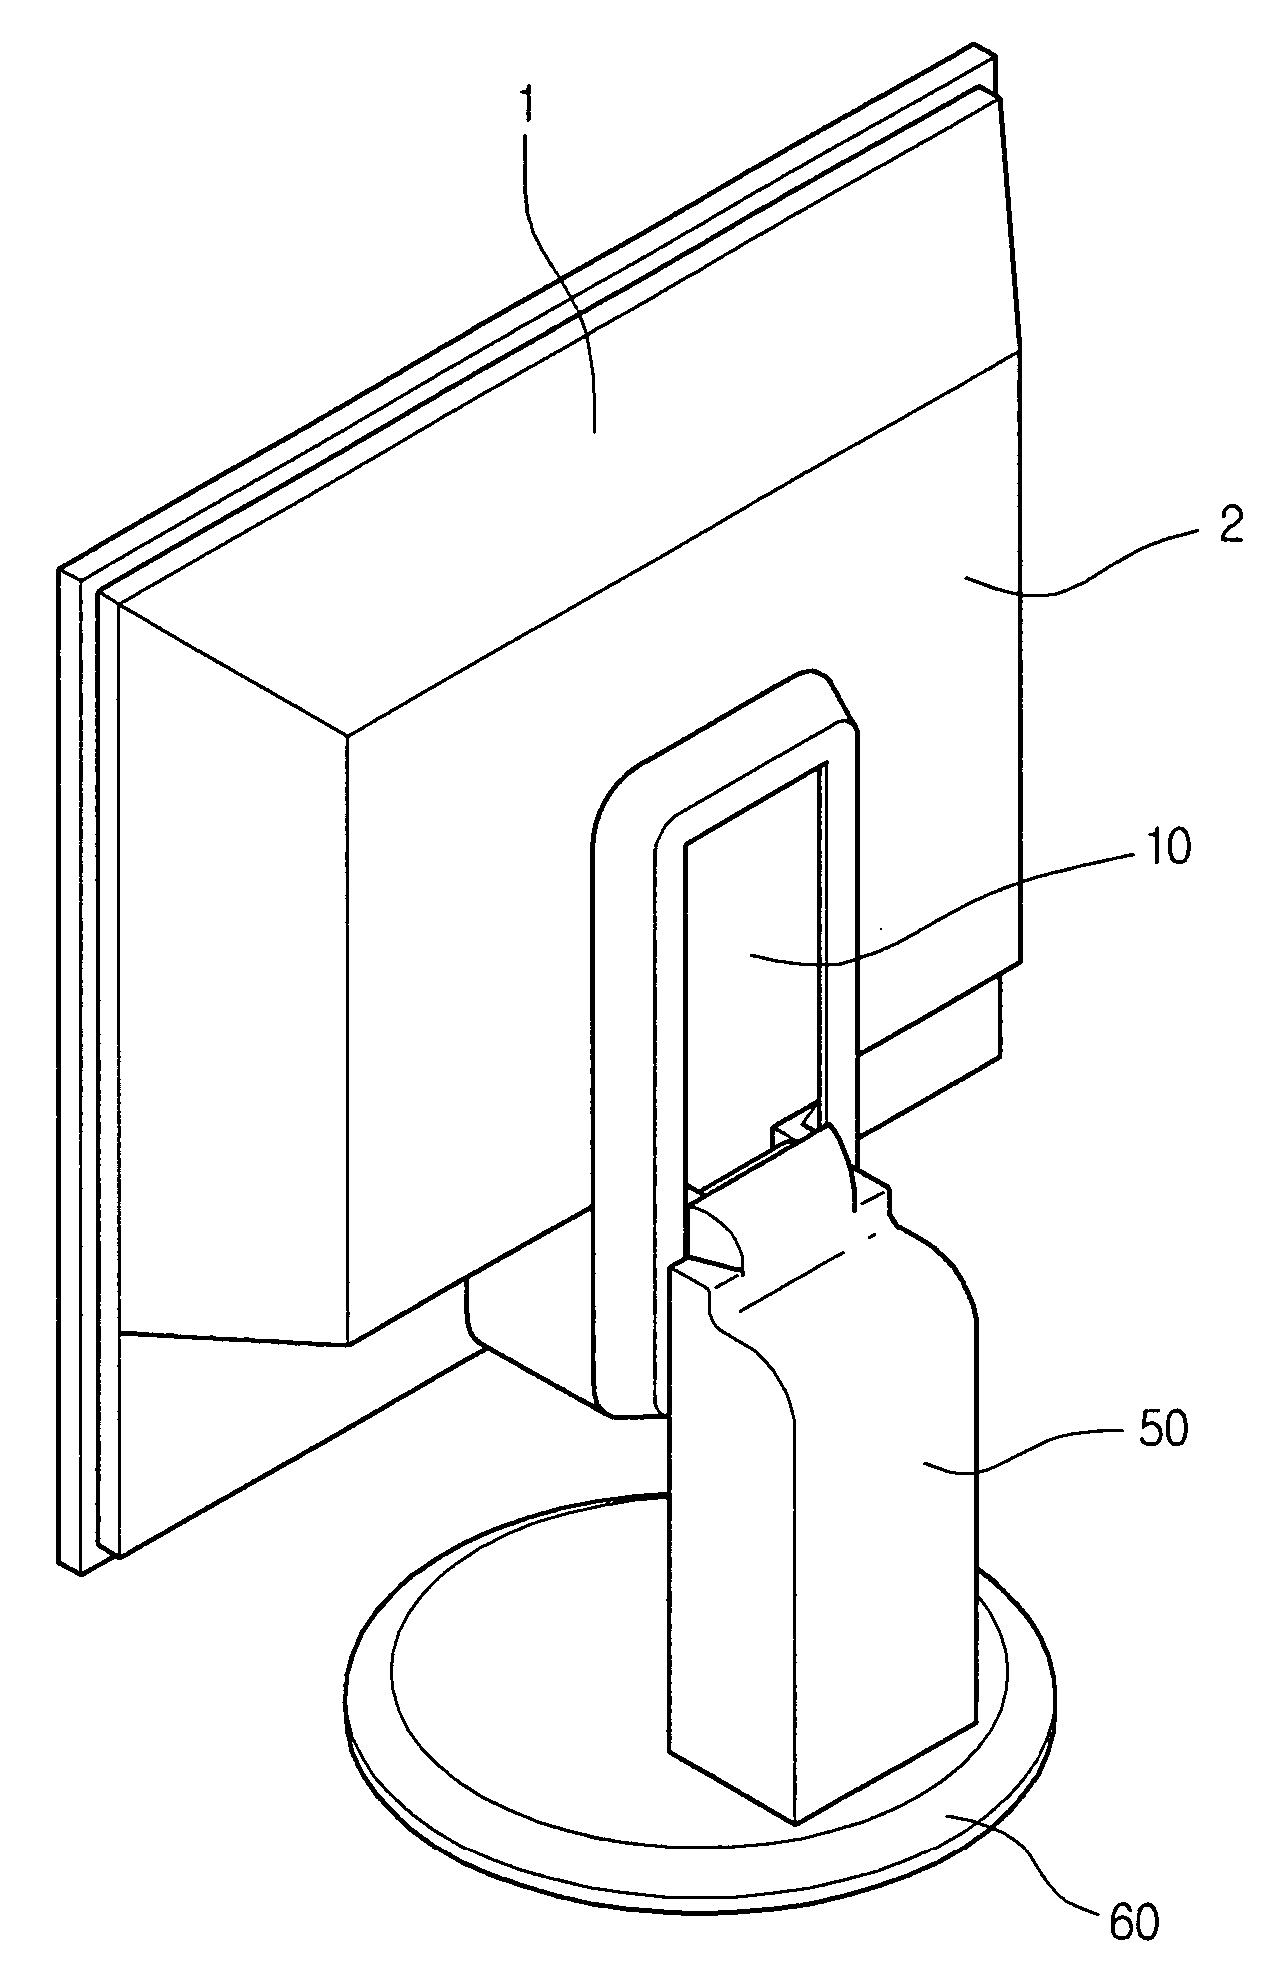 Height adjusting device of a display device and stand for display device